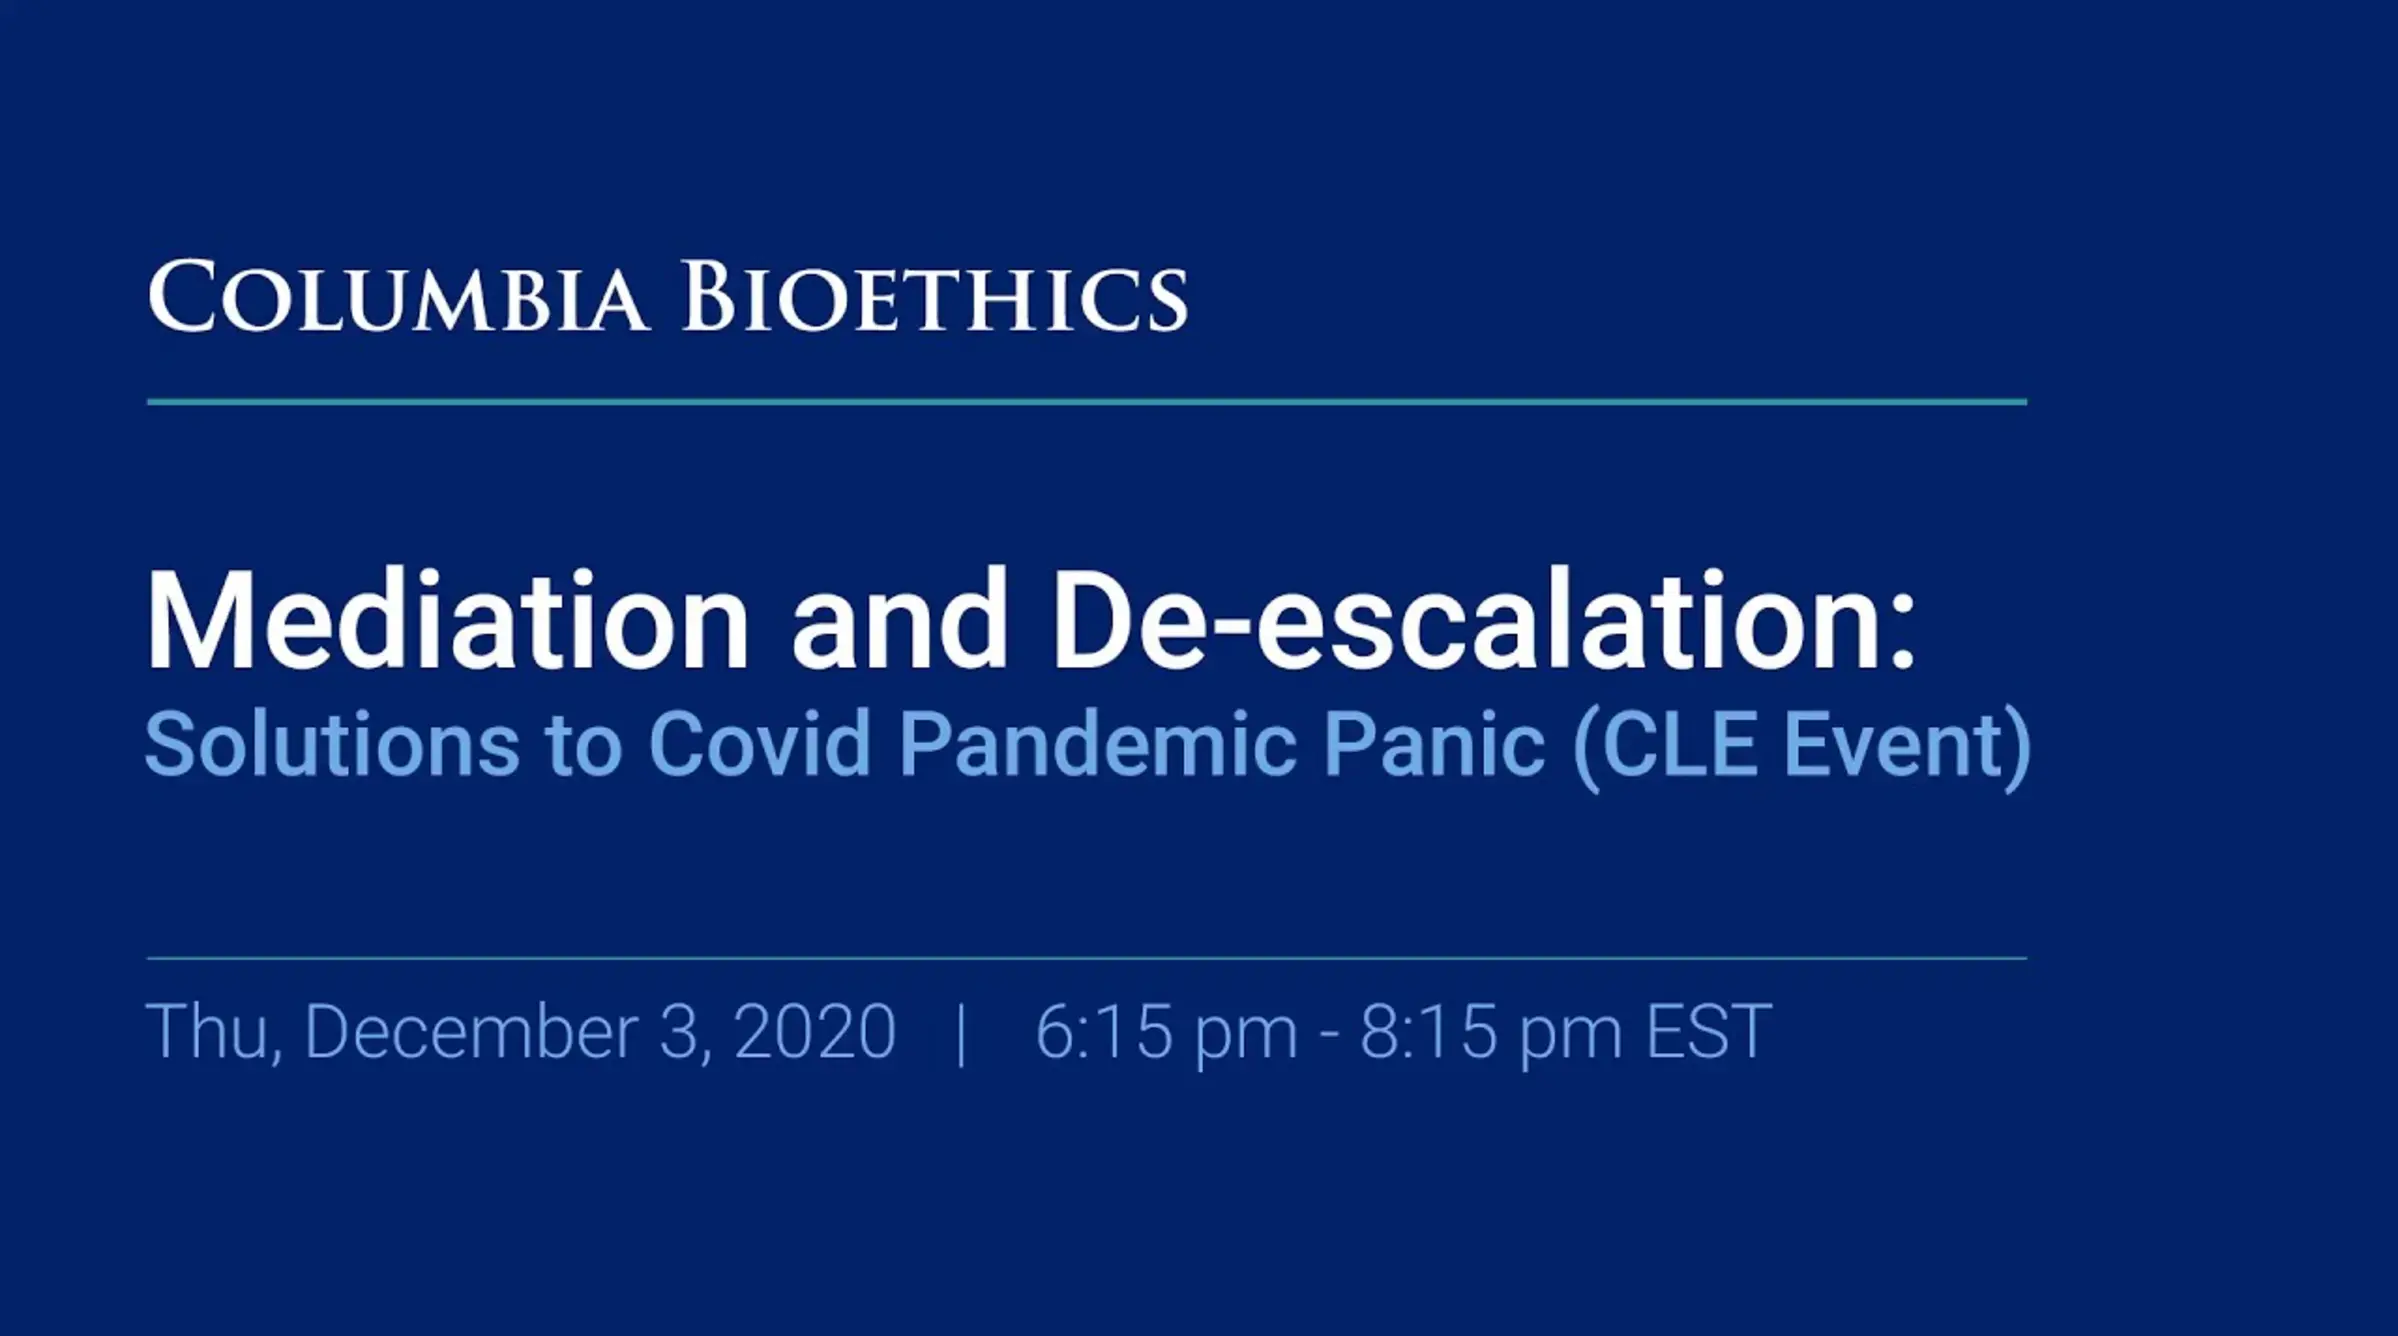 Mediation and De-escalation: Solutions to Covid Pandemic Panic (CLE Event)